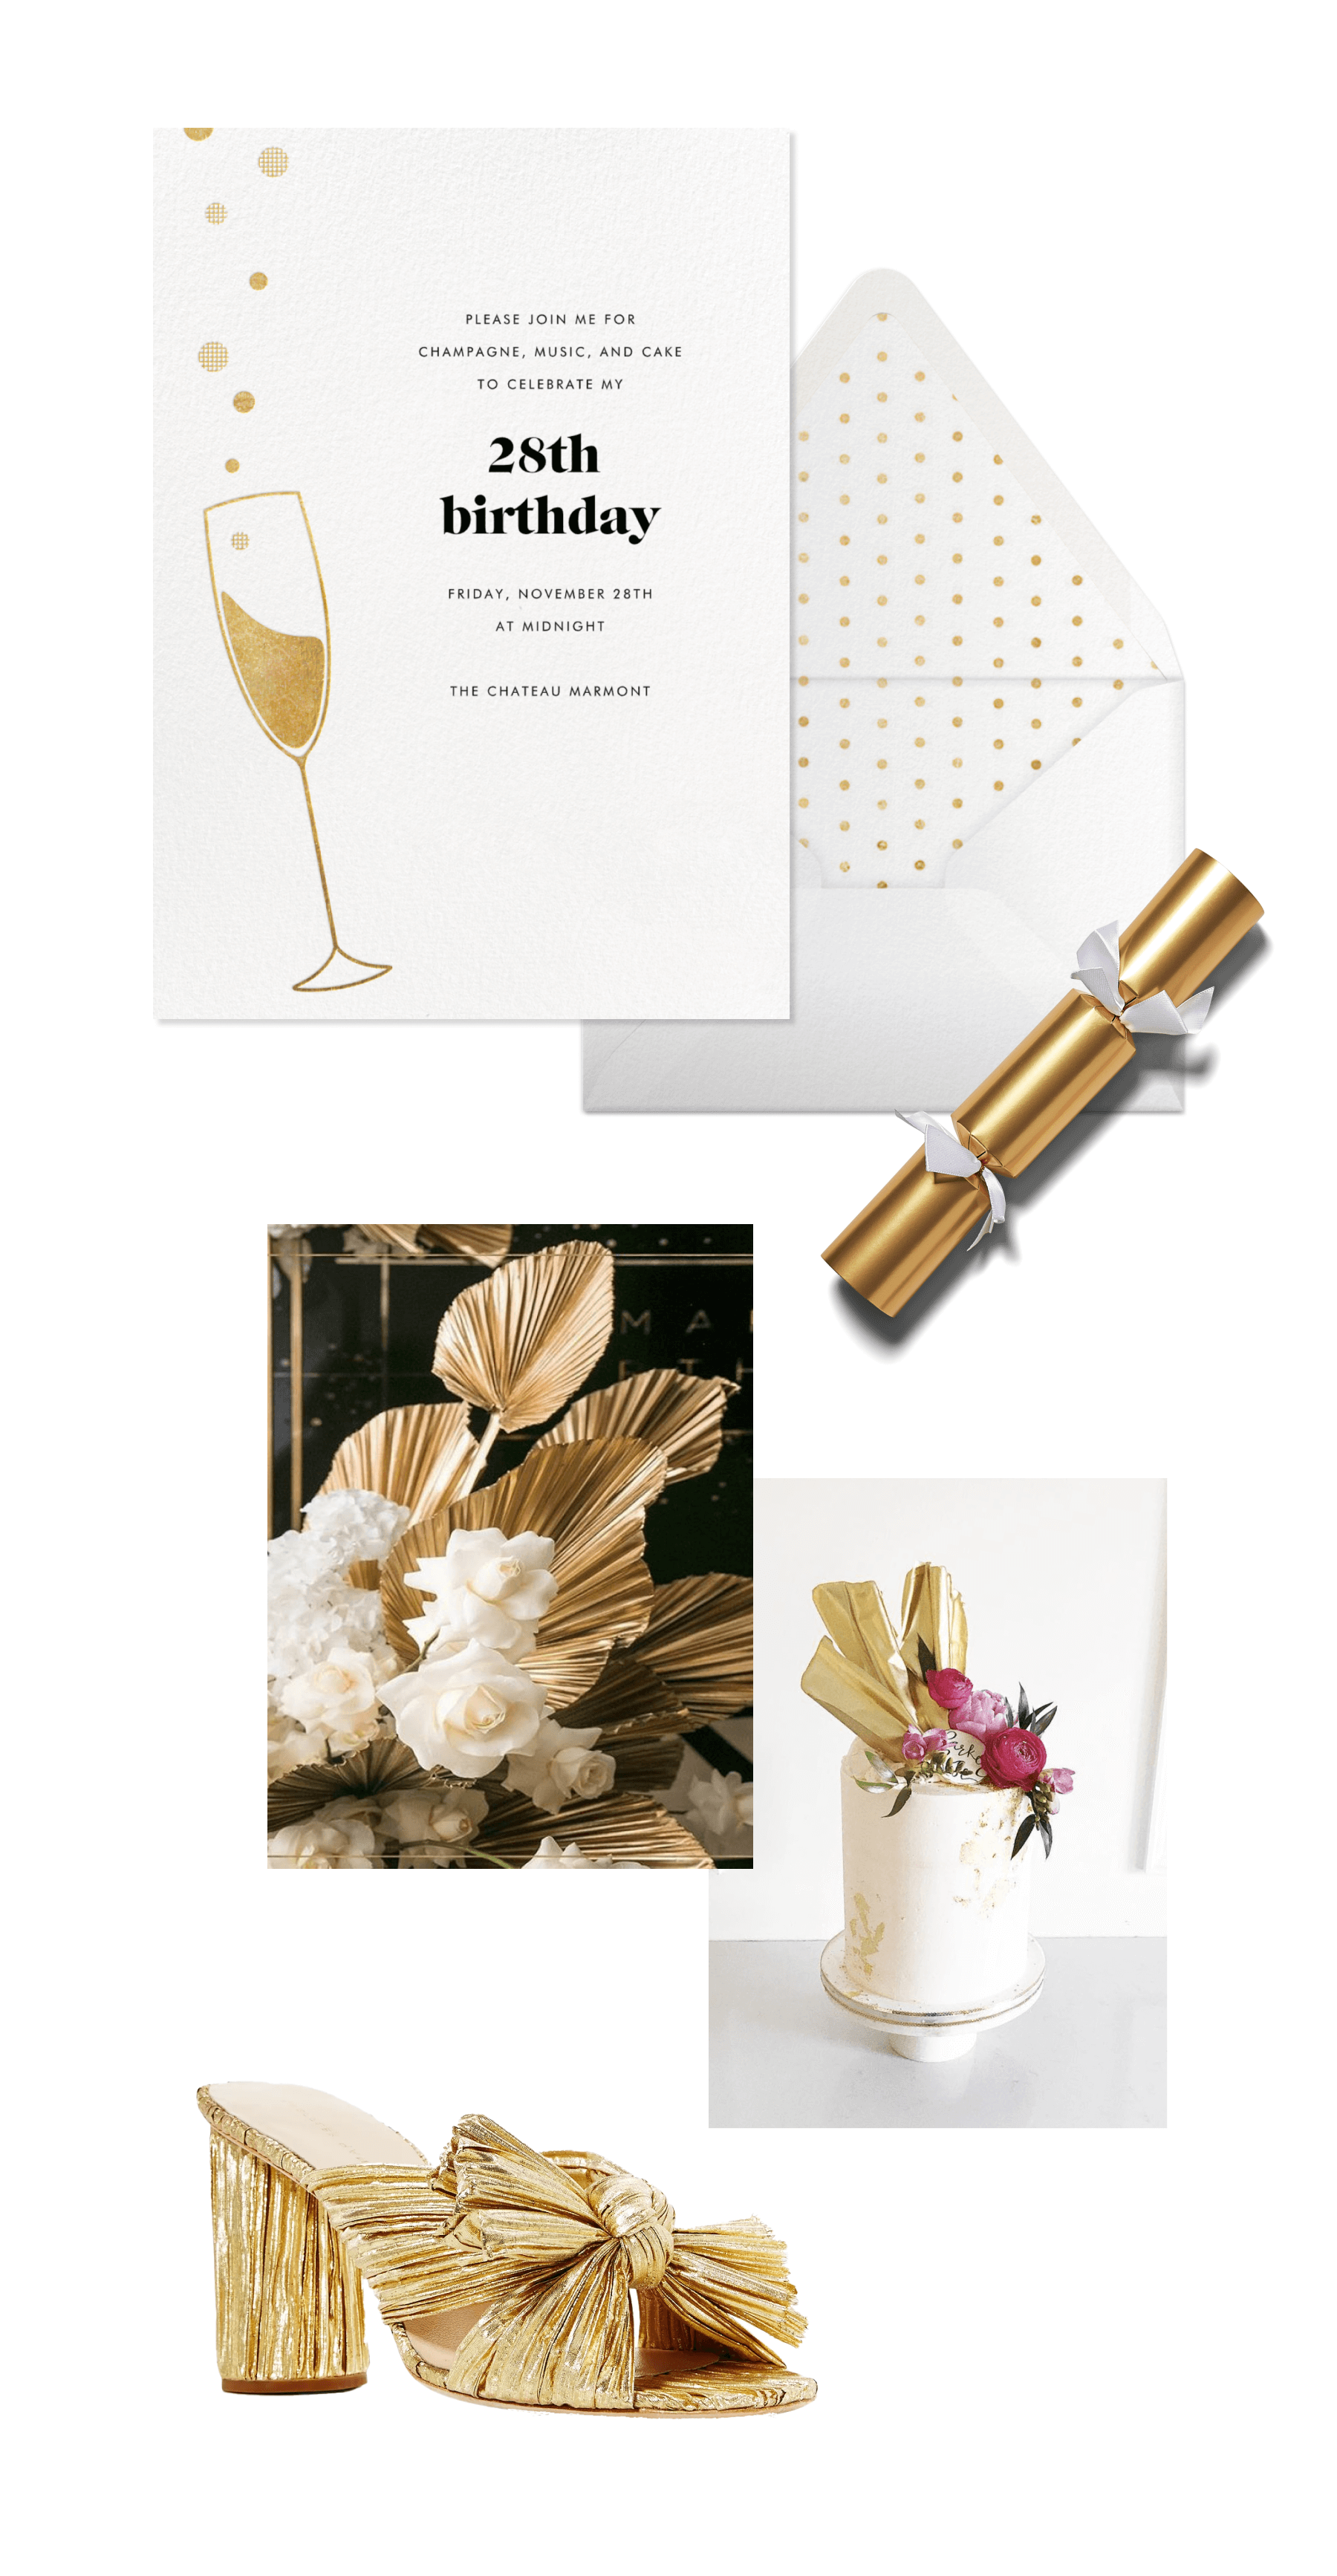 An invitation with a gold Champagne flute; a gold party cracker; white roses with gold leaves; a cake with gold and floral topper; gold sandal heels.